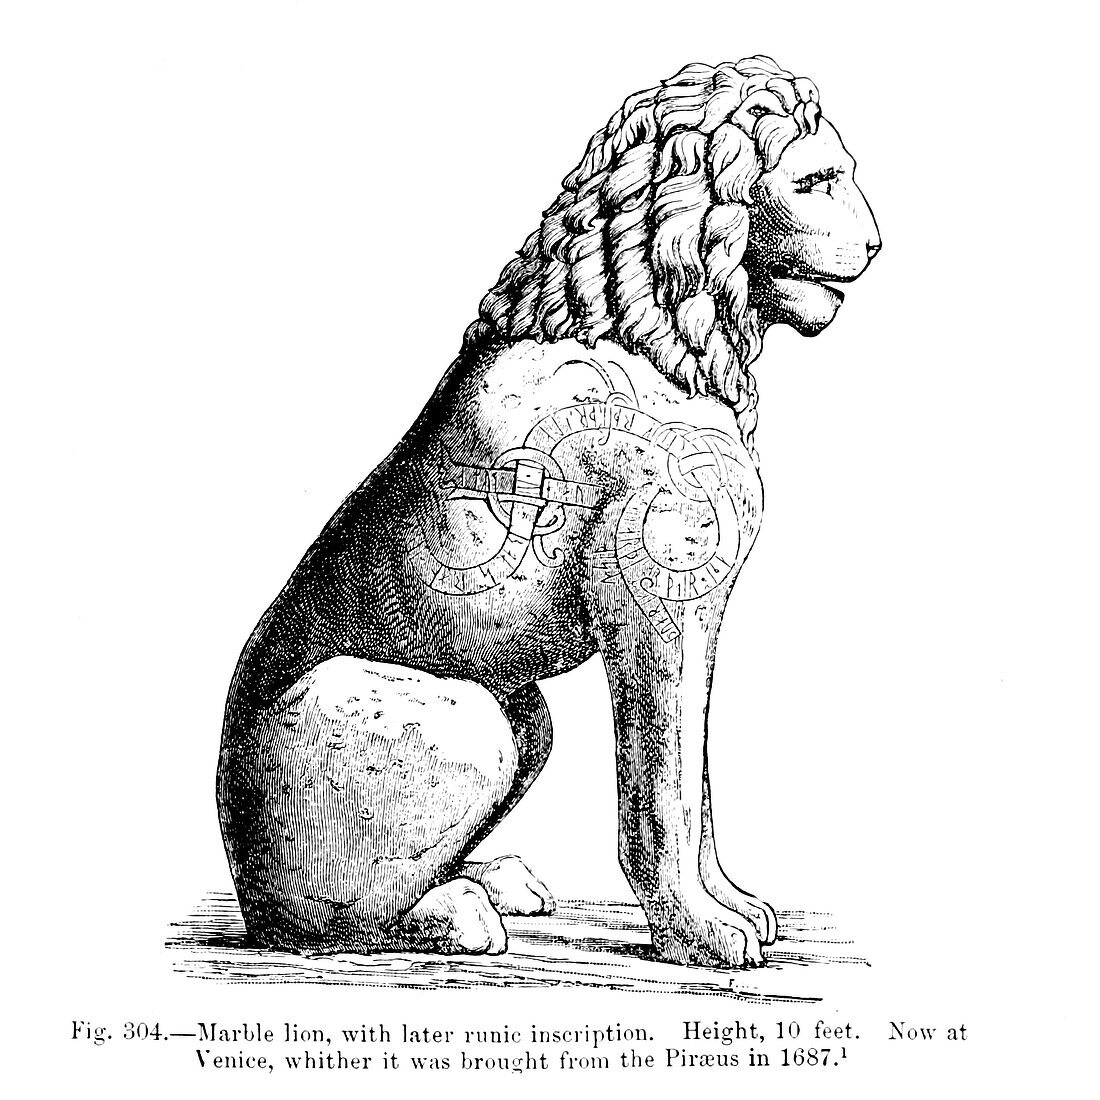 Marble lion with runic inscription, illustration